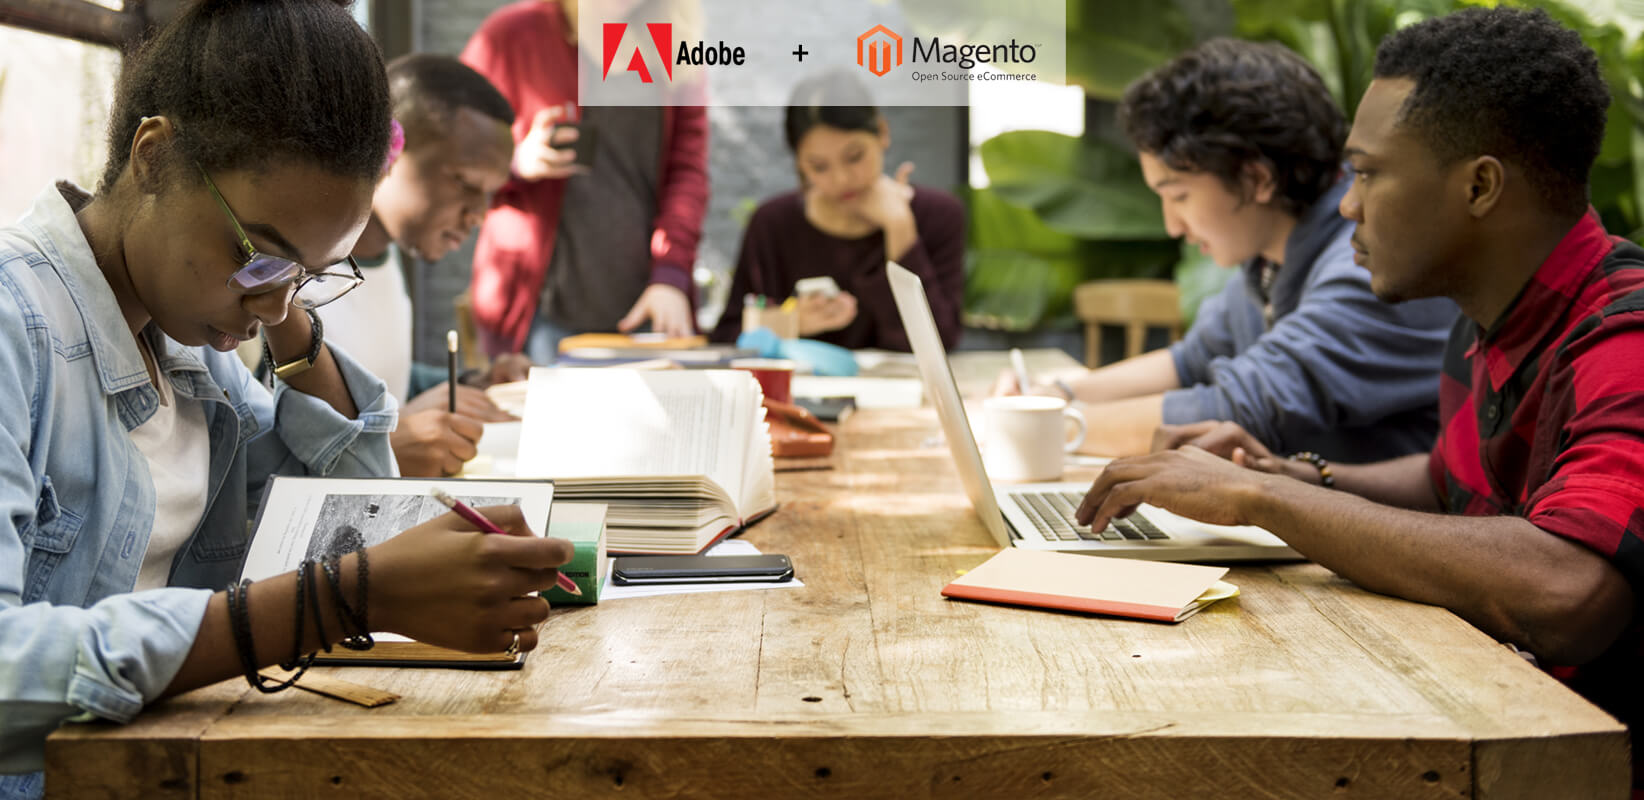 Adobe Acquires Magento – Are You in Denial?